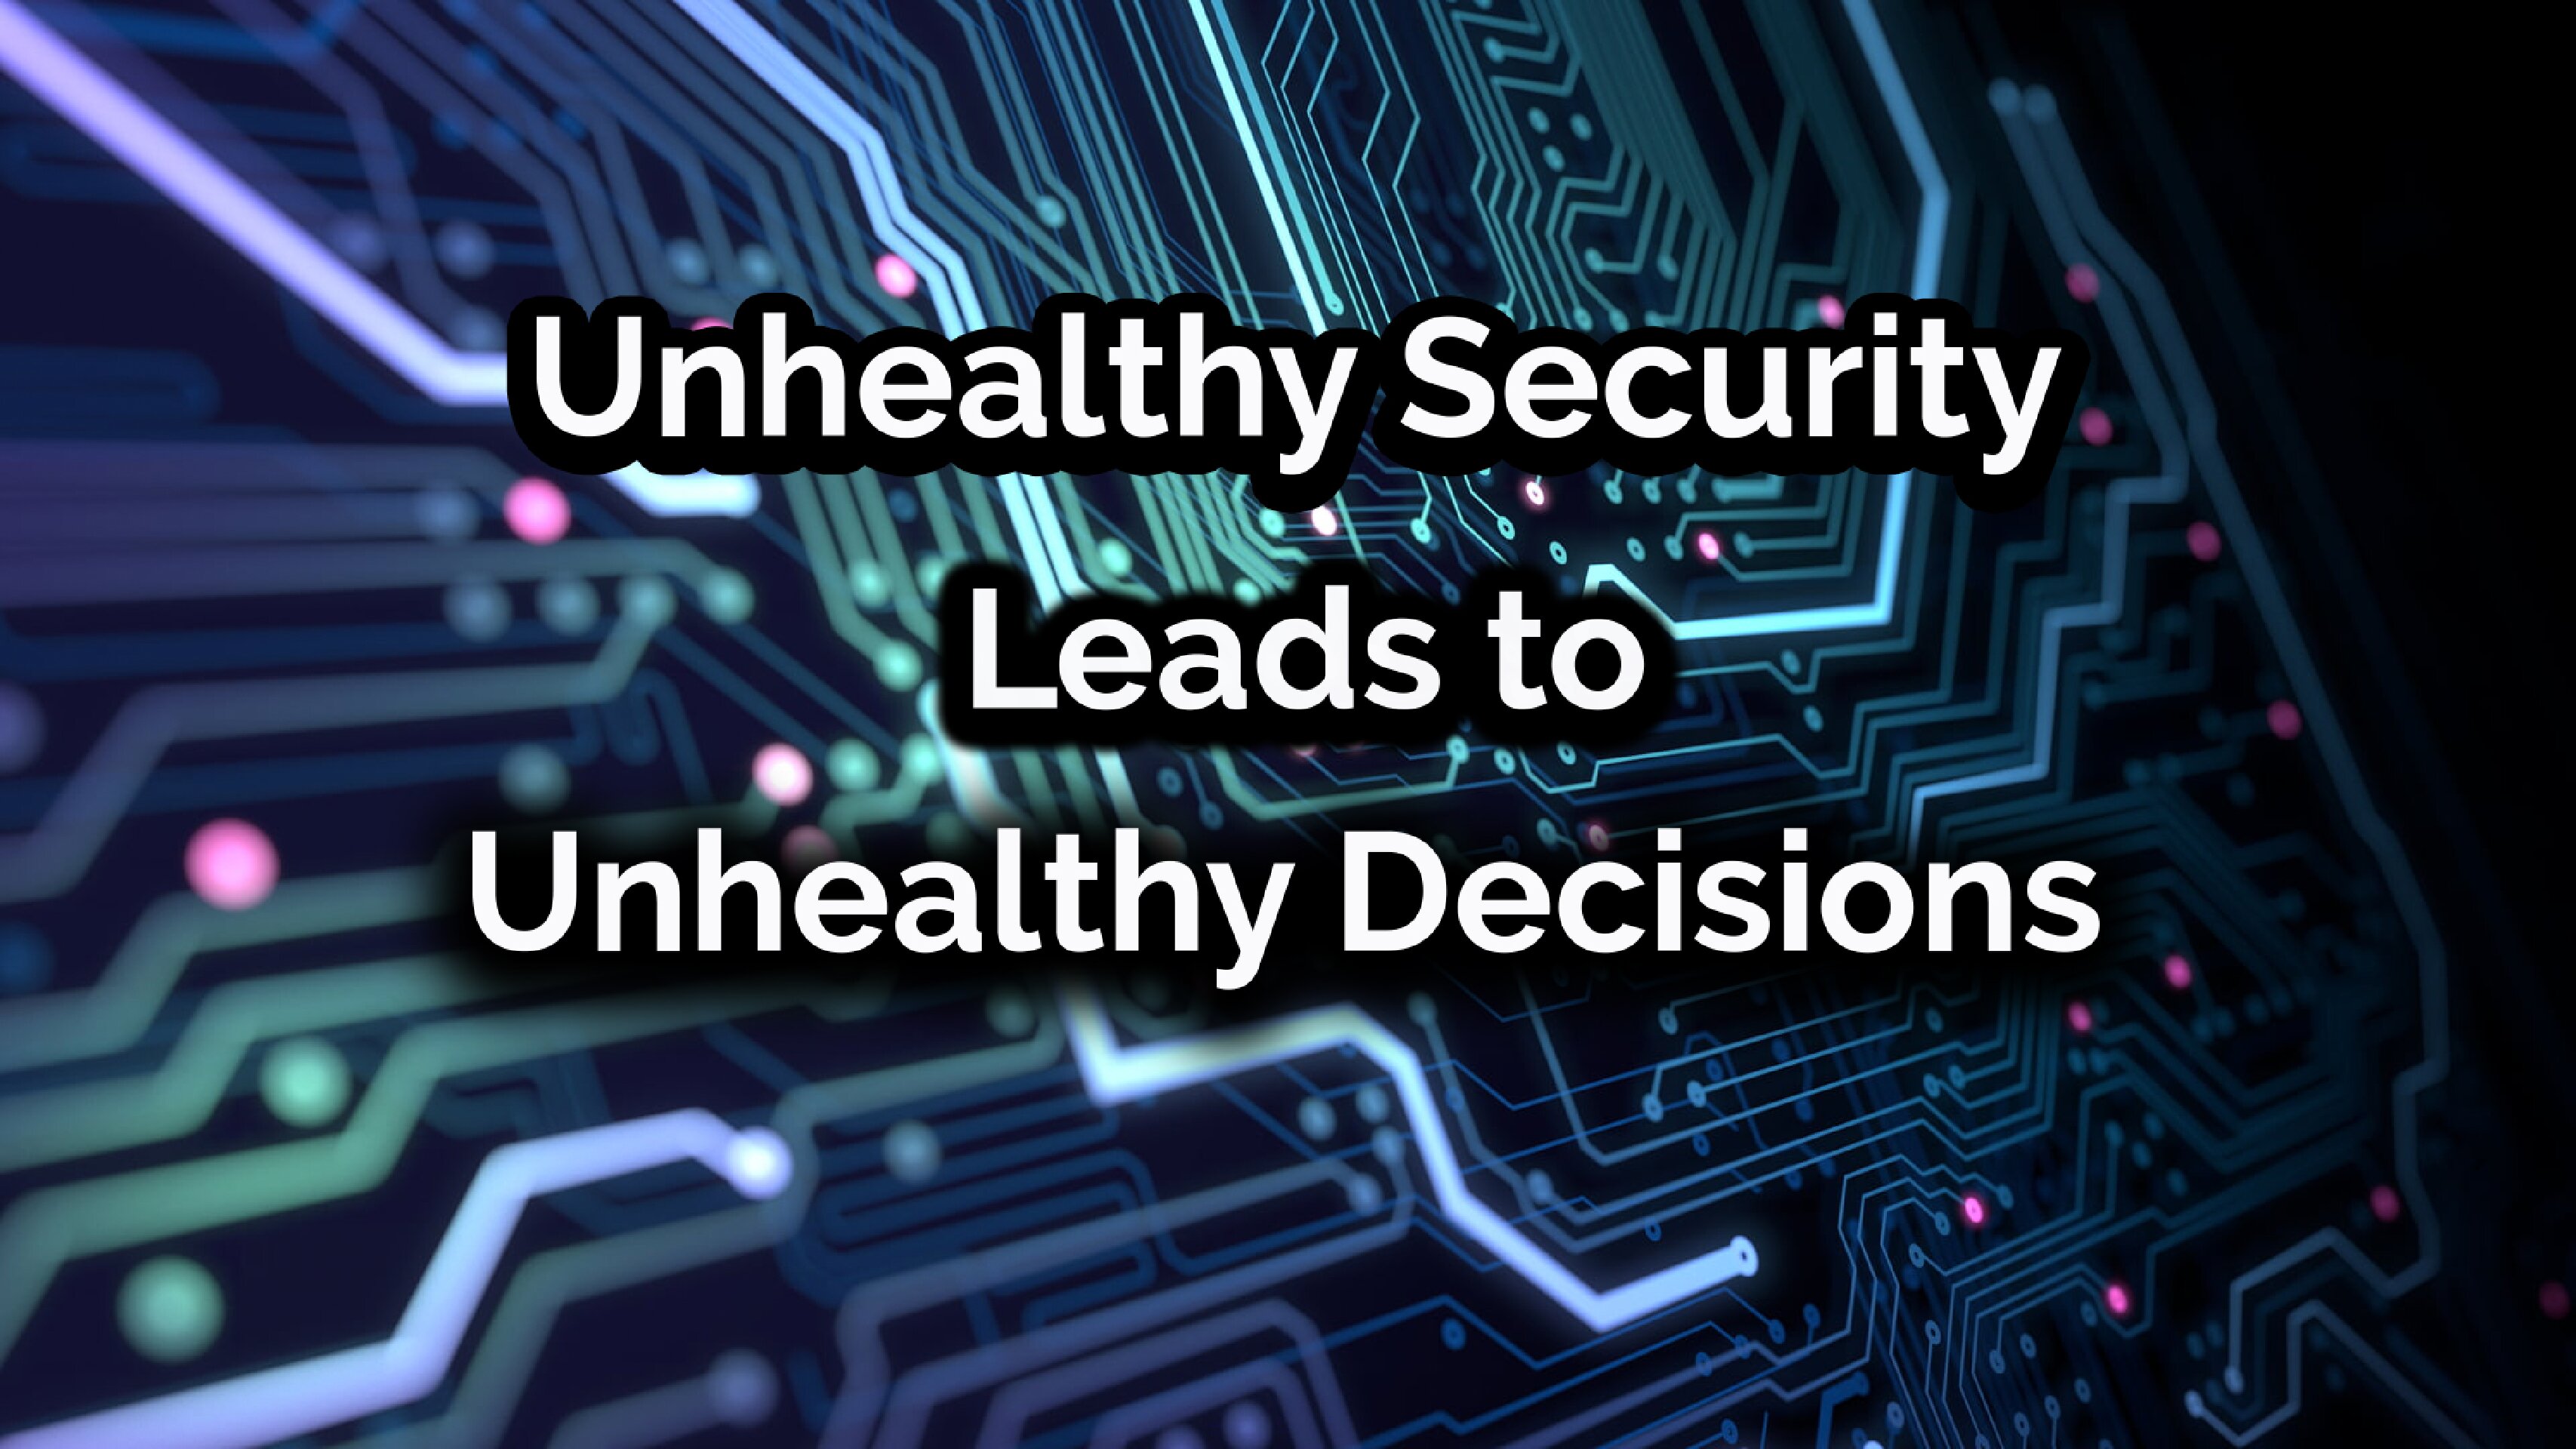 Unhealthy Security Leads to Unhealthy Decisions